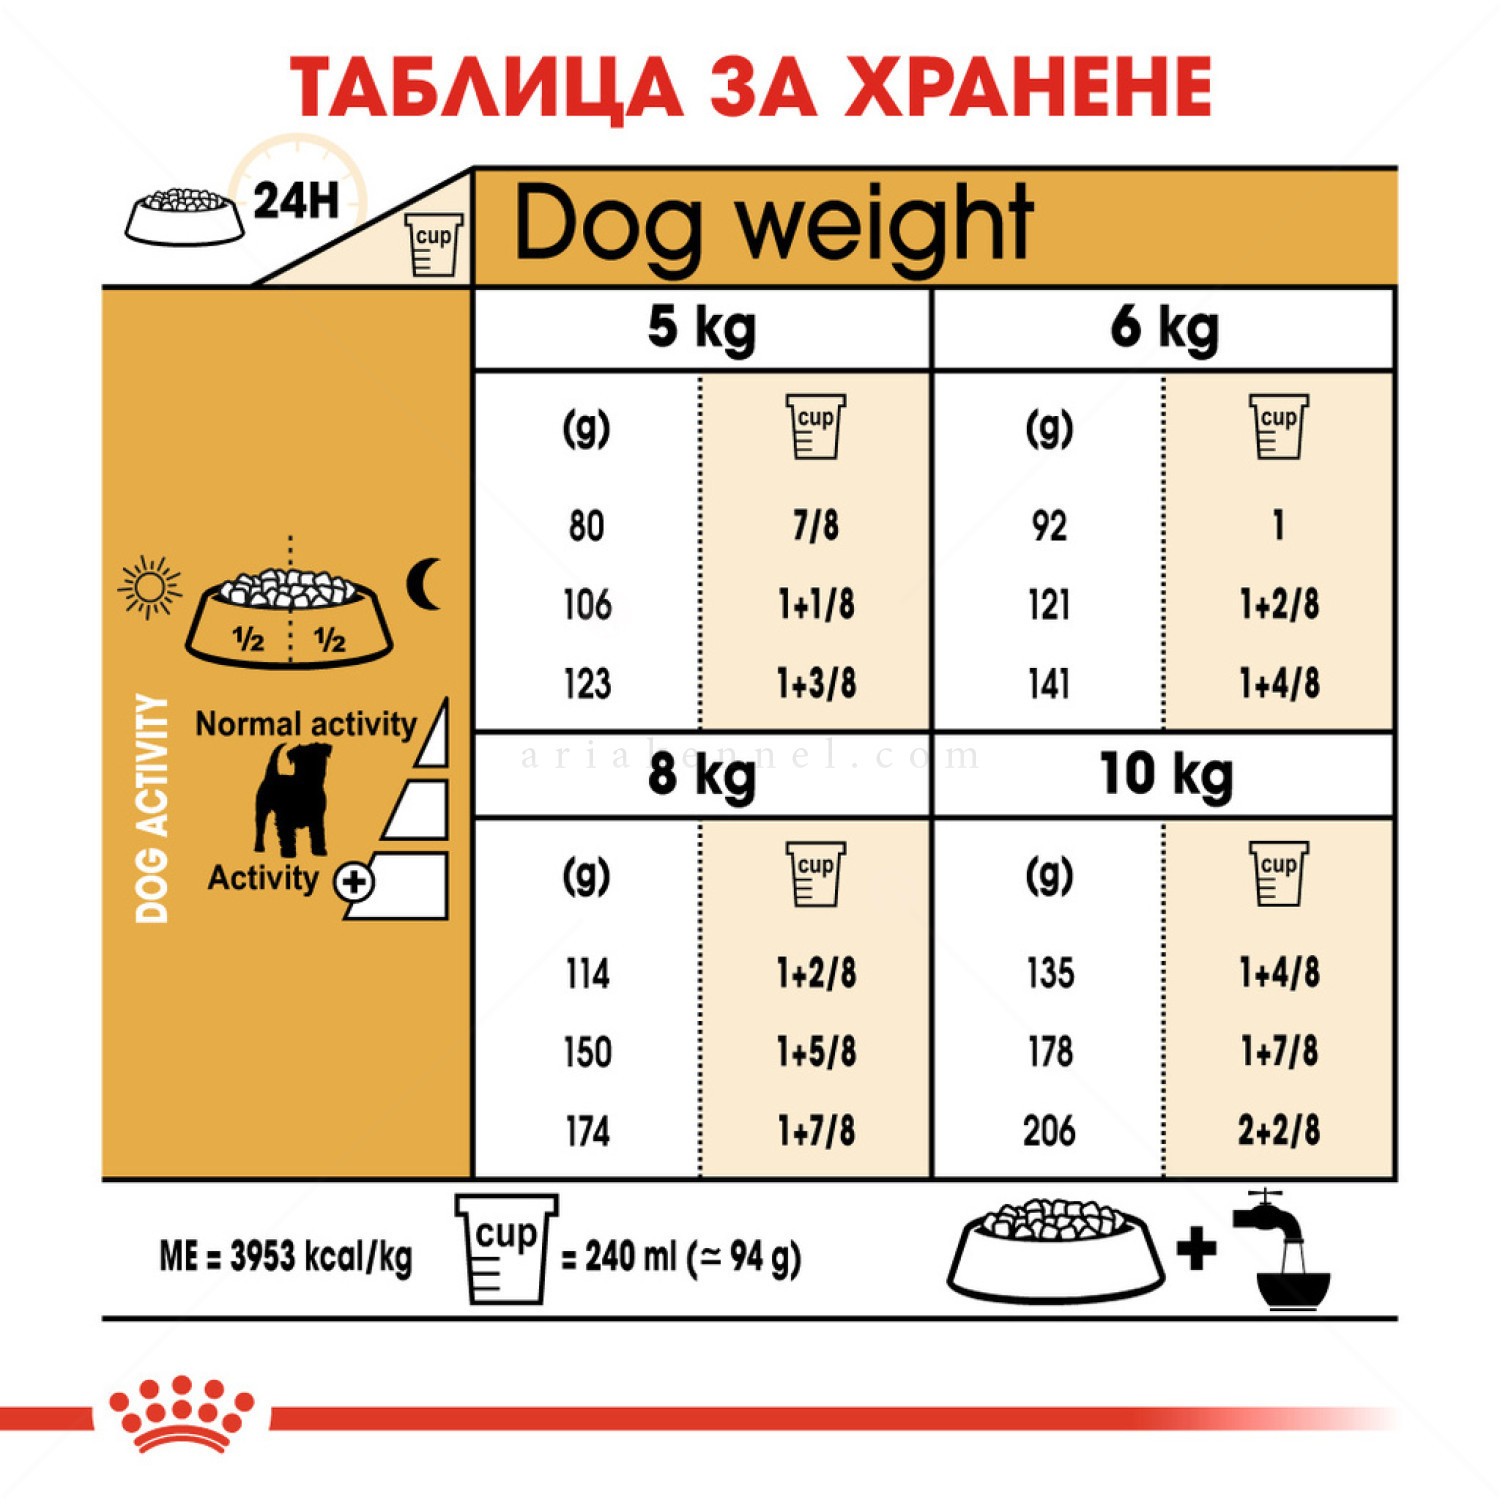 ROYAL CANIN Adult Jack Russell Terrier - 1.500 кг